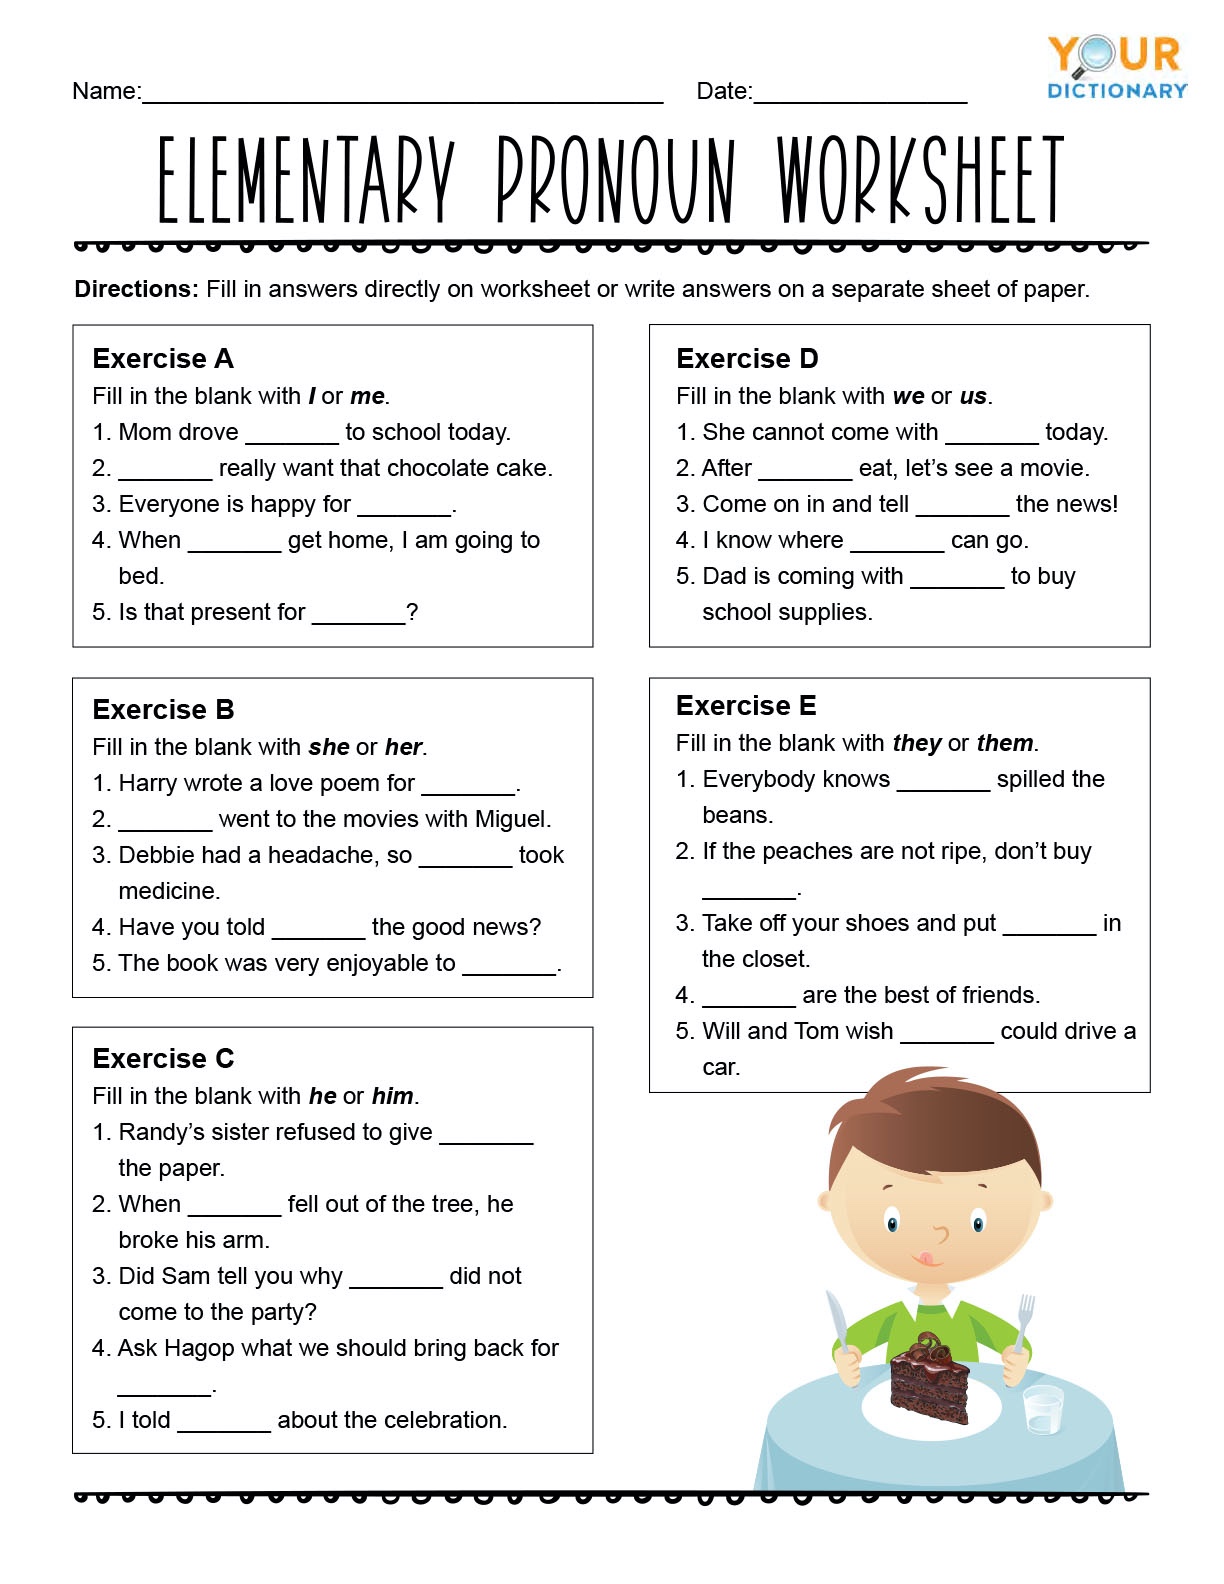 pronoun-worksheets-for-practice-and-review